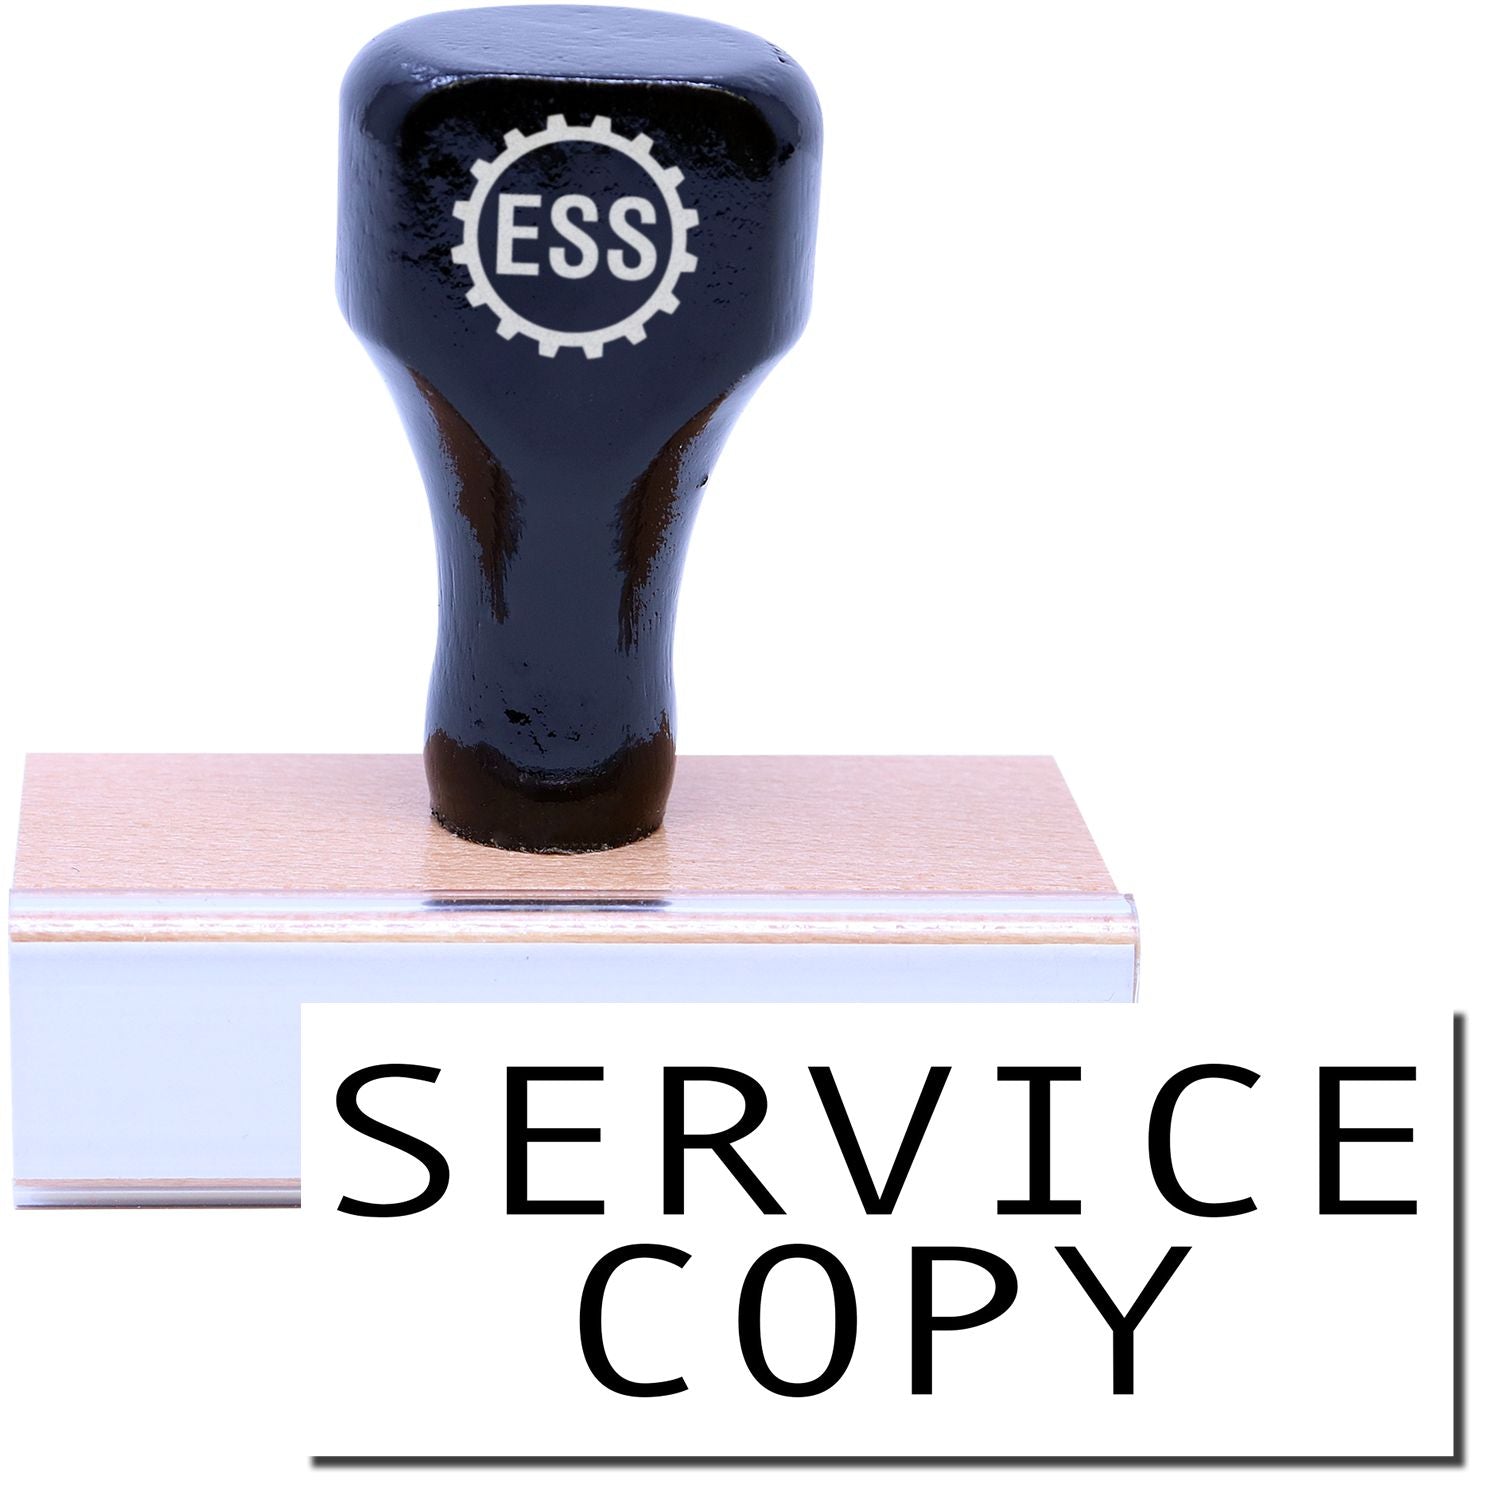 A stock office rubber stamp with a stamped image showing how the text "SERVICE COPY" in a large font is displayed after stamping.